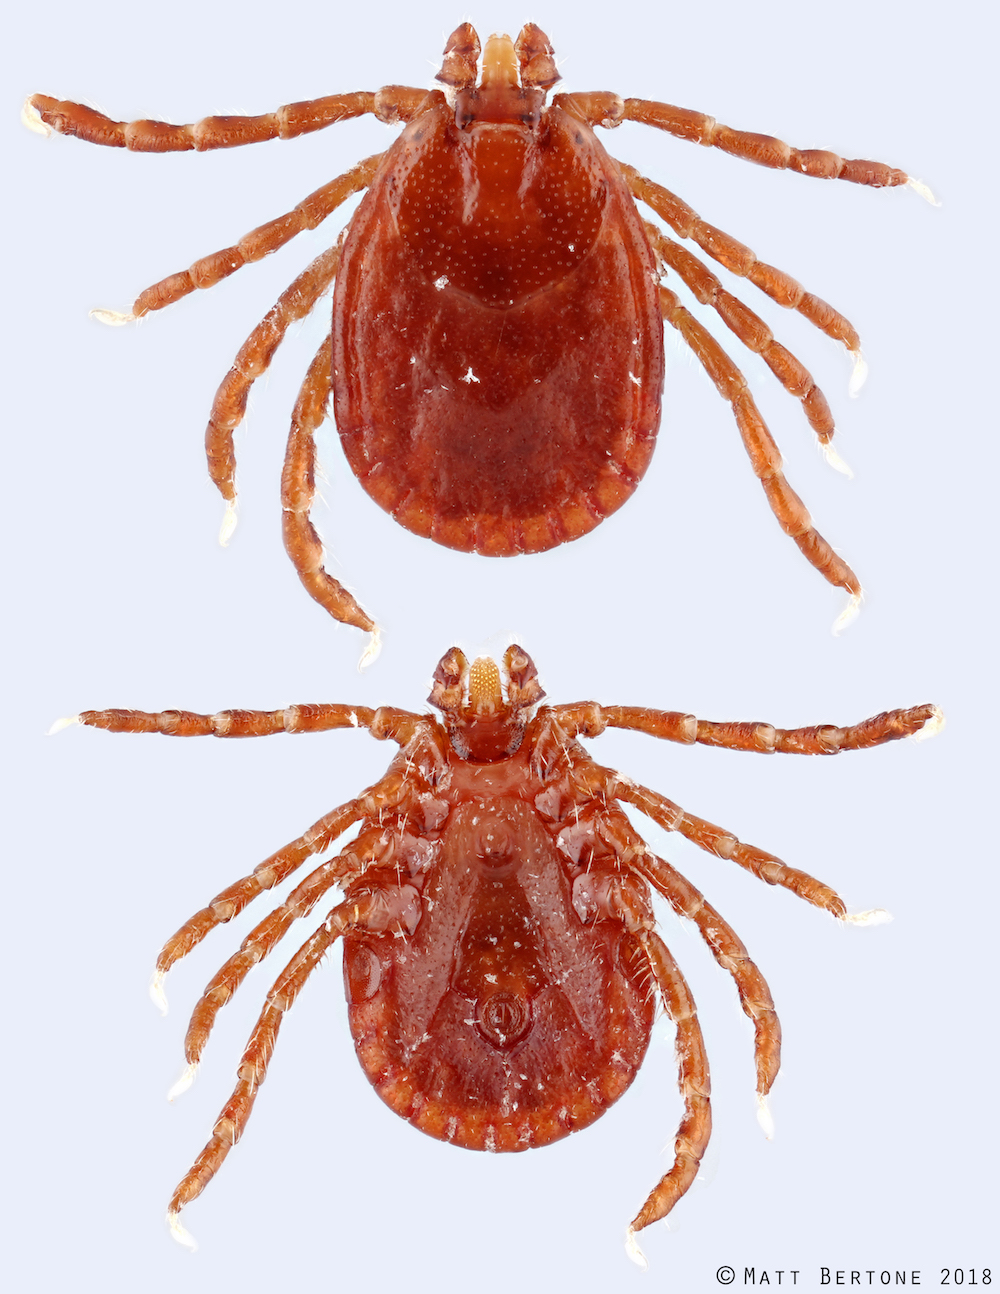 The Asian longhorned tick, an invasive tick species recently identified in several Eastern U.S. states, has been documented as far south as North Carolina.